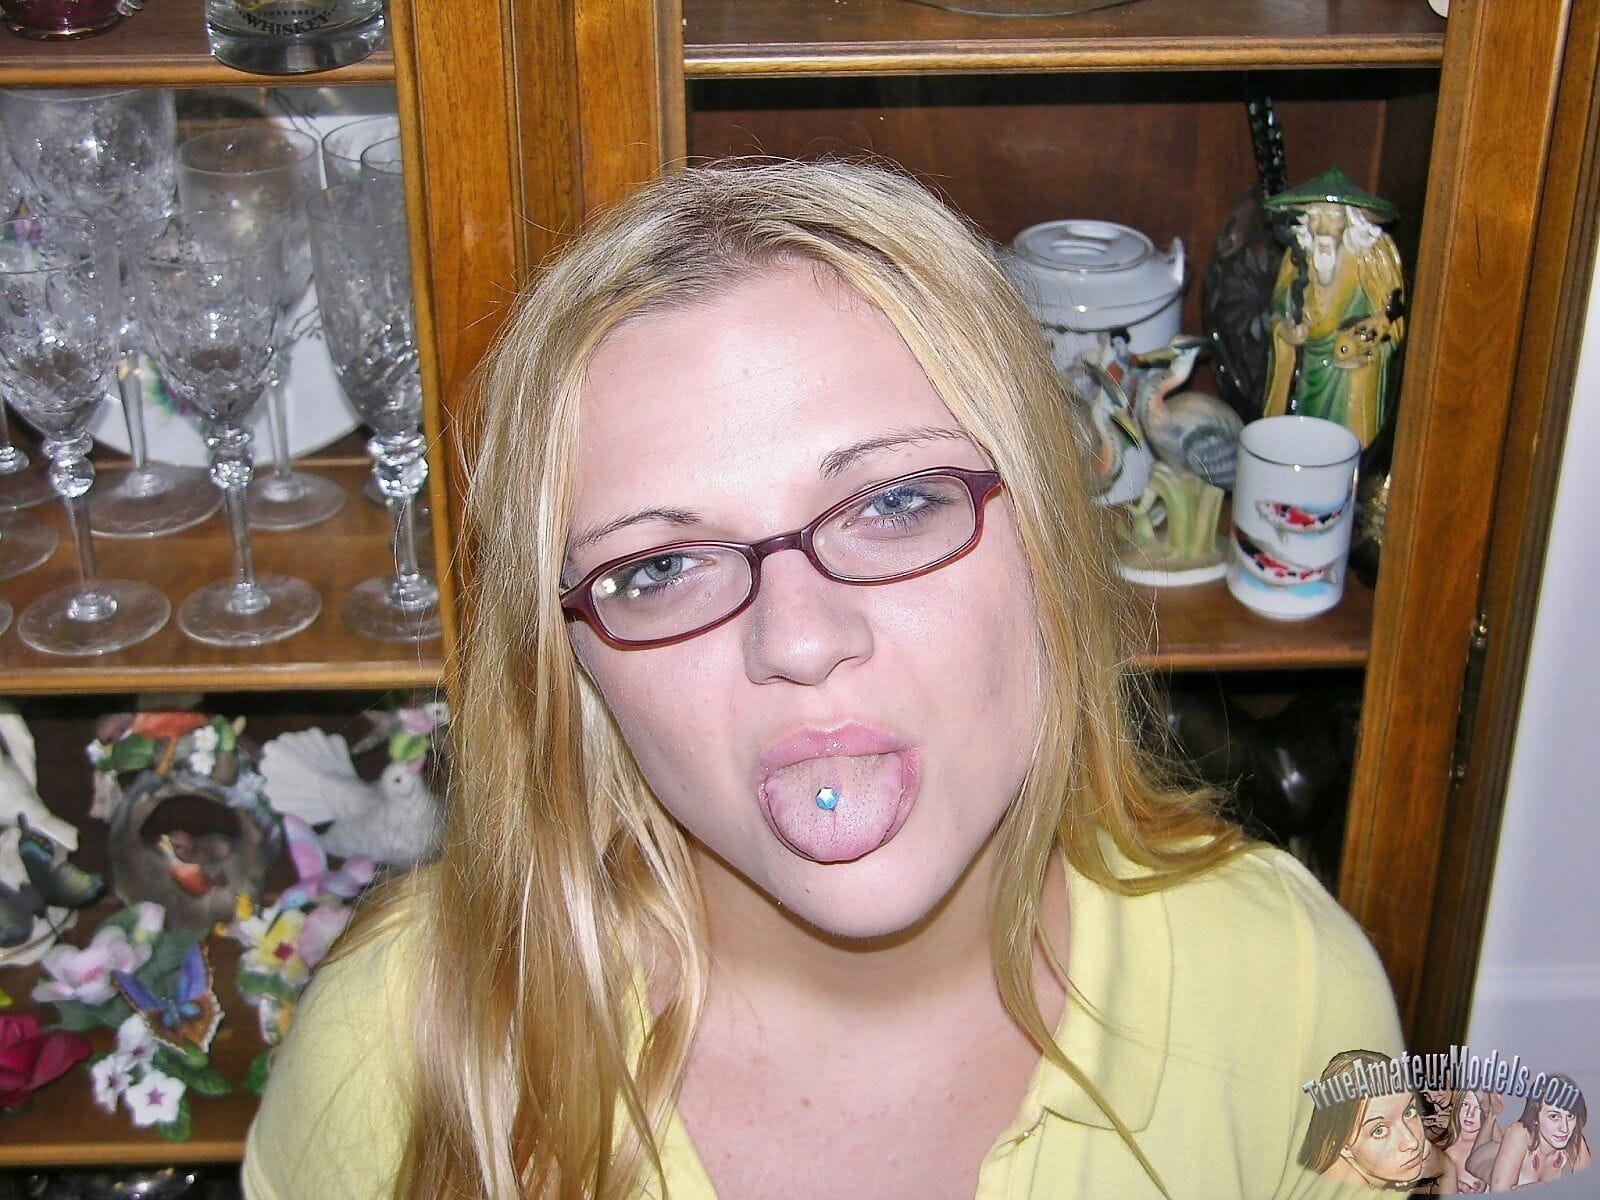 Teen nerd with glasses gives blowjob and models nude - part 4923 page 1